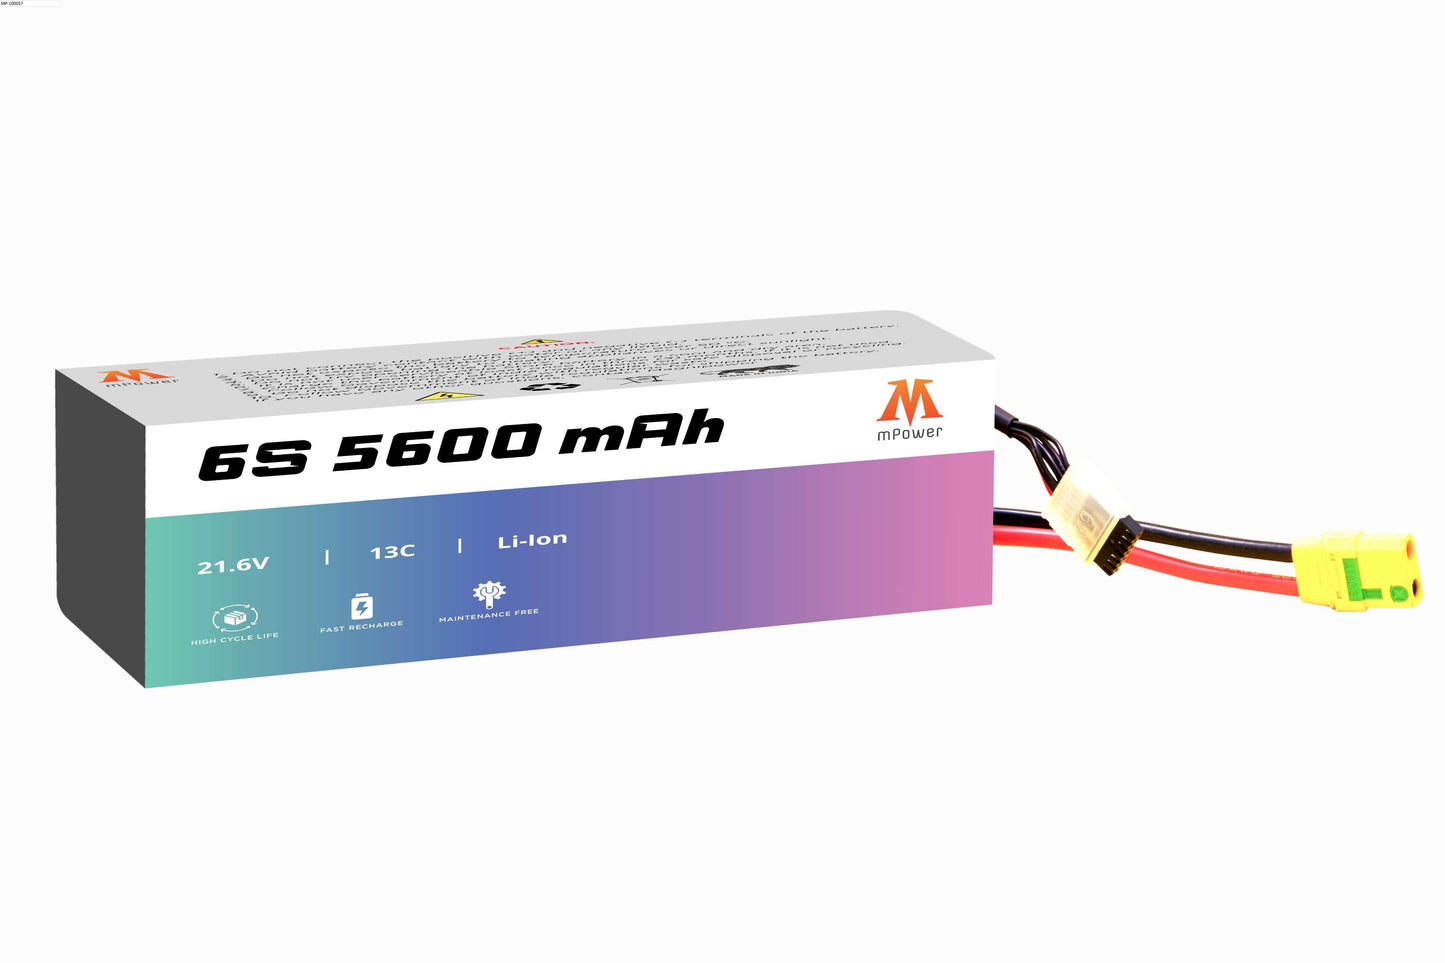 mPower 6S 5600mAh Lithium-Ion Battery for Surveillance Drones